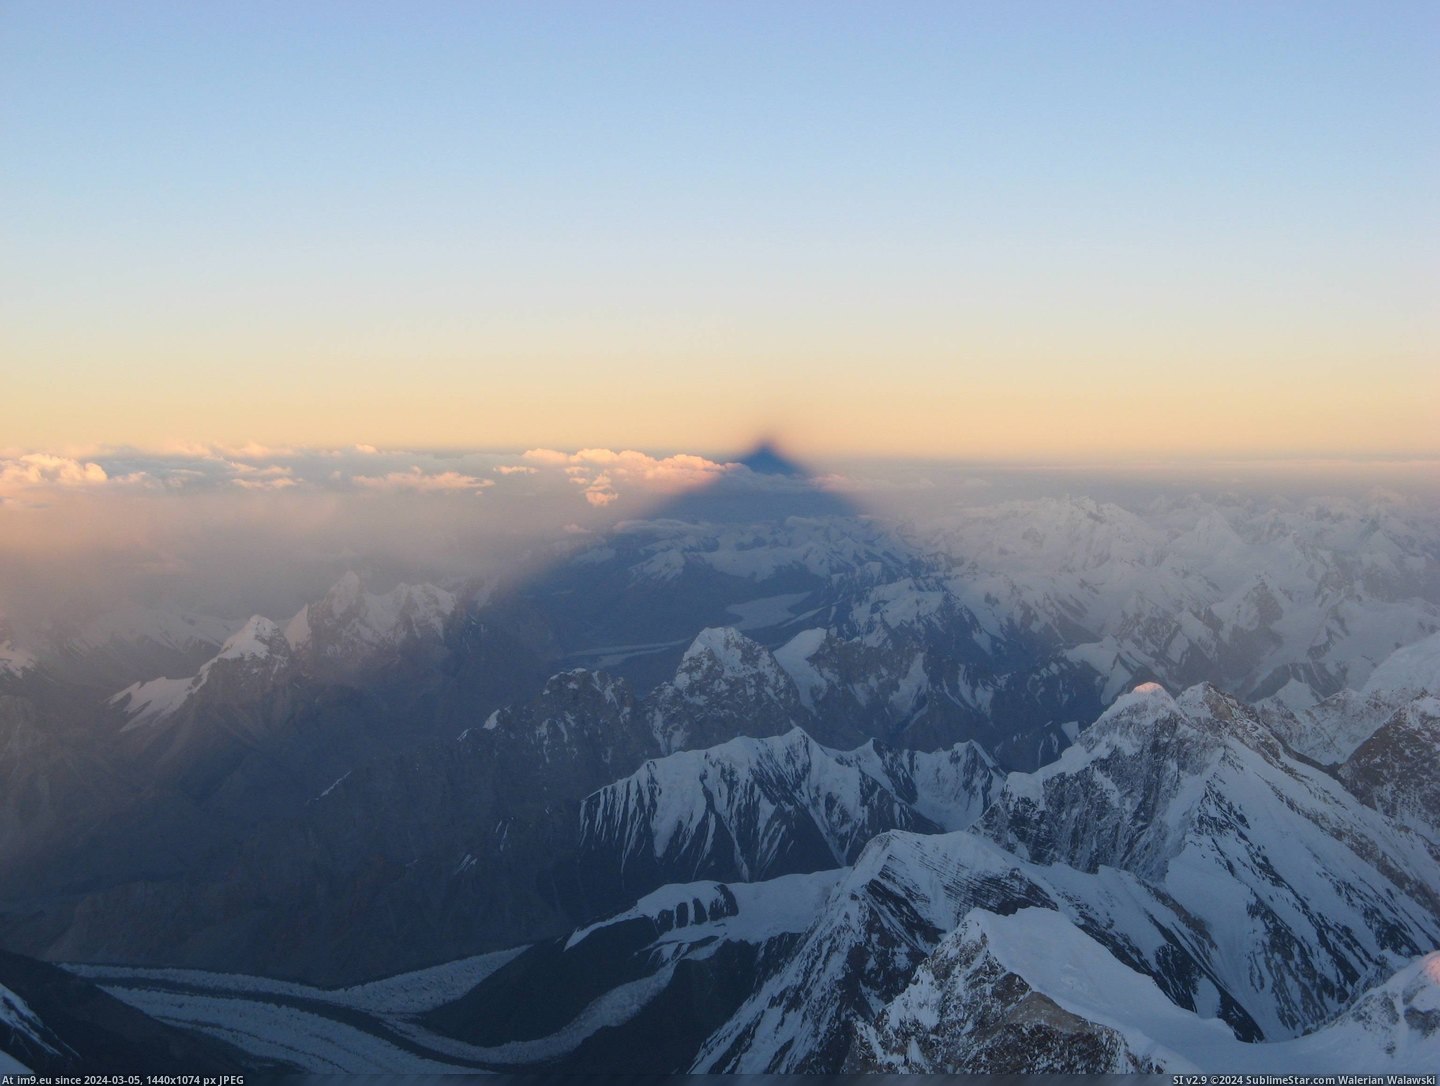 #China #Shadow #Miles #Projected #Warner #Chris #3072x2304 #Hundreds [Earthporn] The Shadow of K2, projected into China across hundreds of miles. (Chris B. Warner) [3072x2304] Pic. (Bild von album My r/EARTHPORN favs))